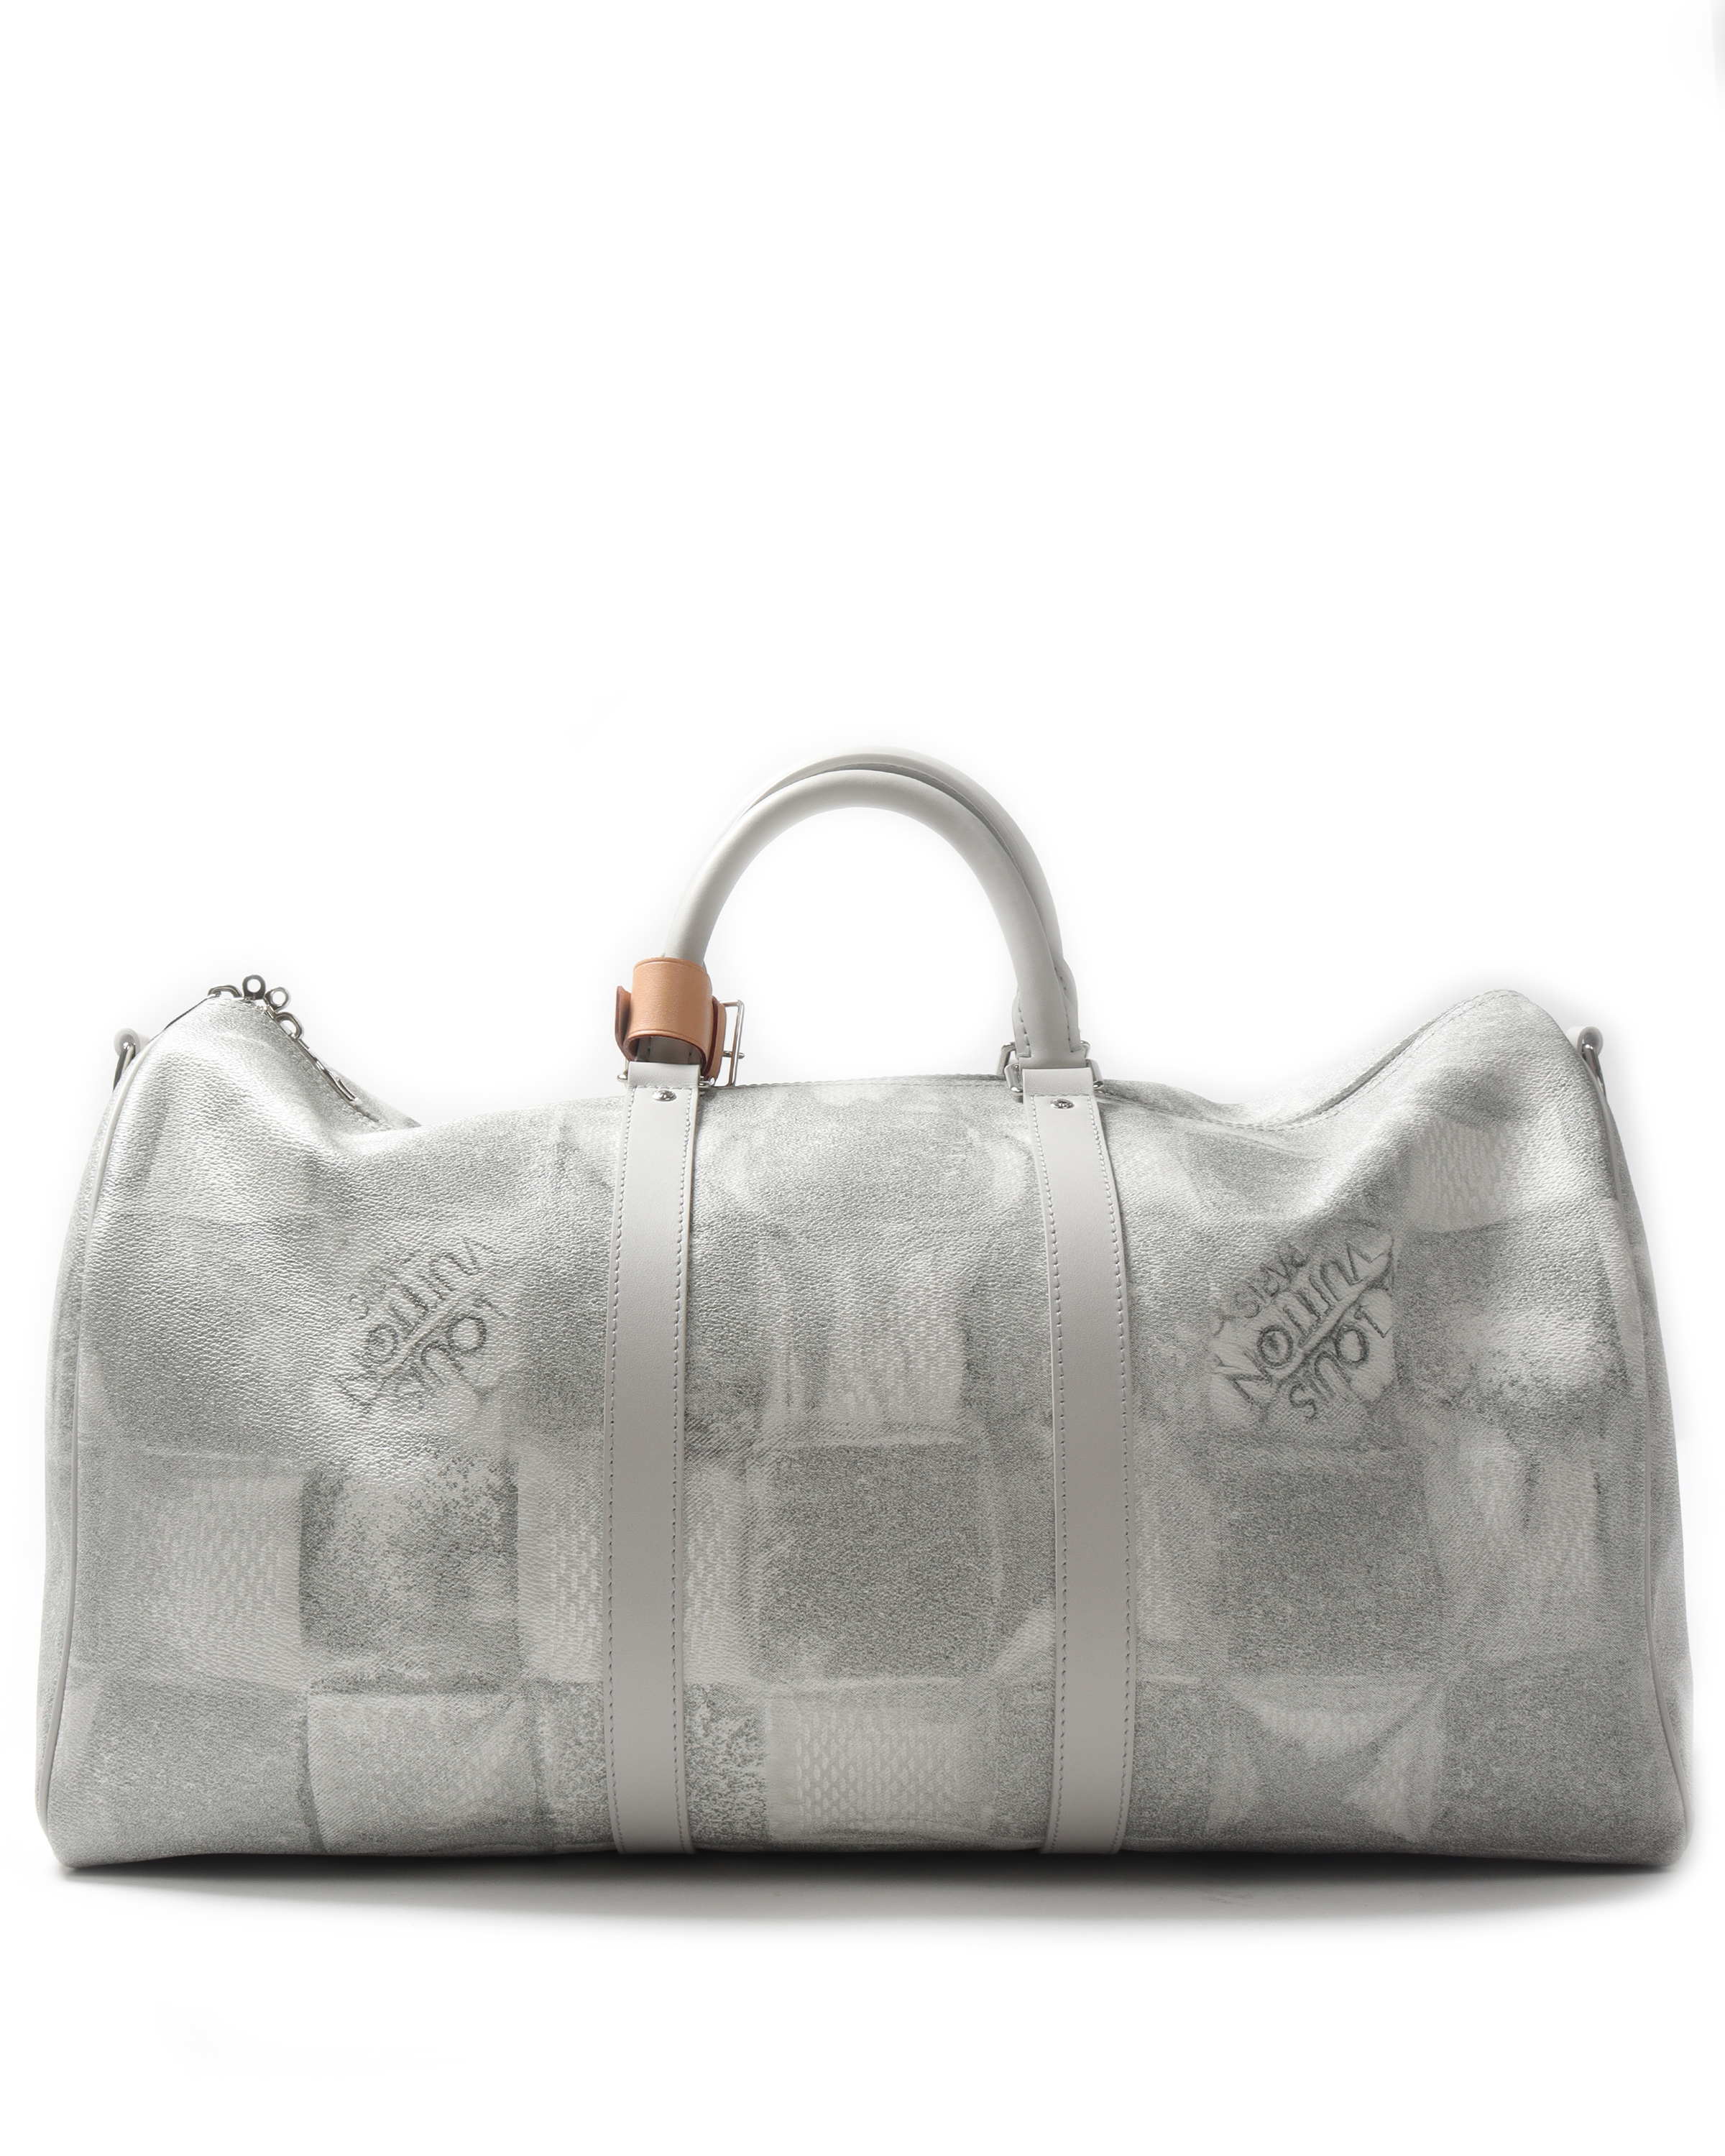 White Louis Vuitton Duffle Bag - 8 For Sale on 1stDibs  louis vuitton  white duffle bag, louis vuitton duffle bag white, lv duffle bag white